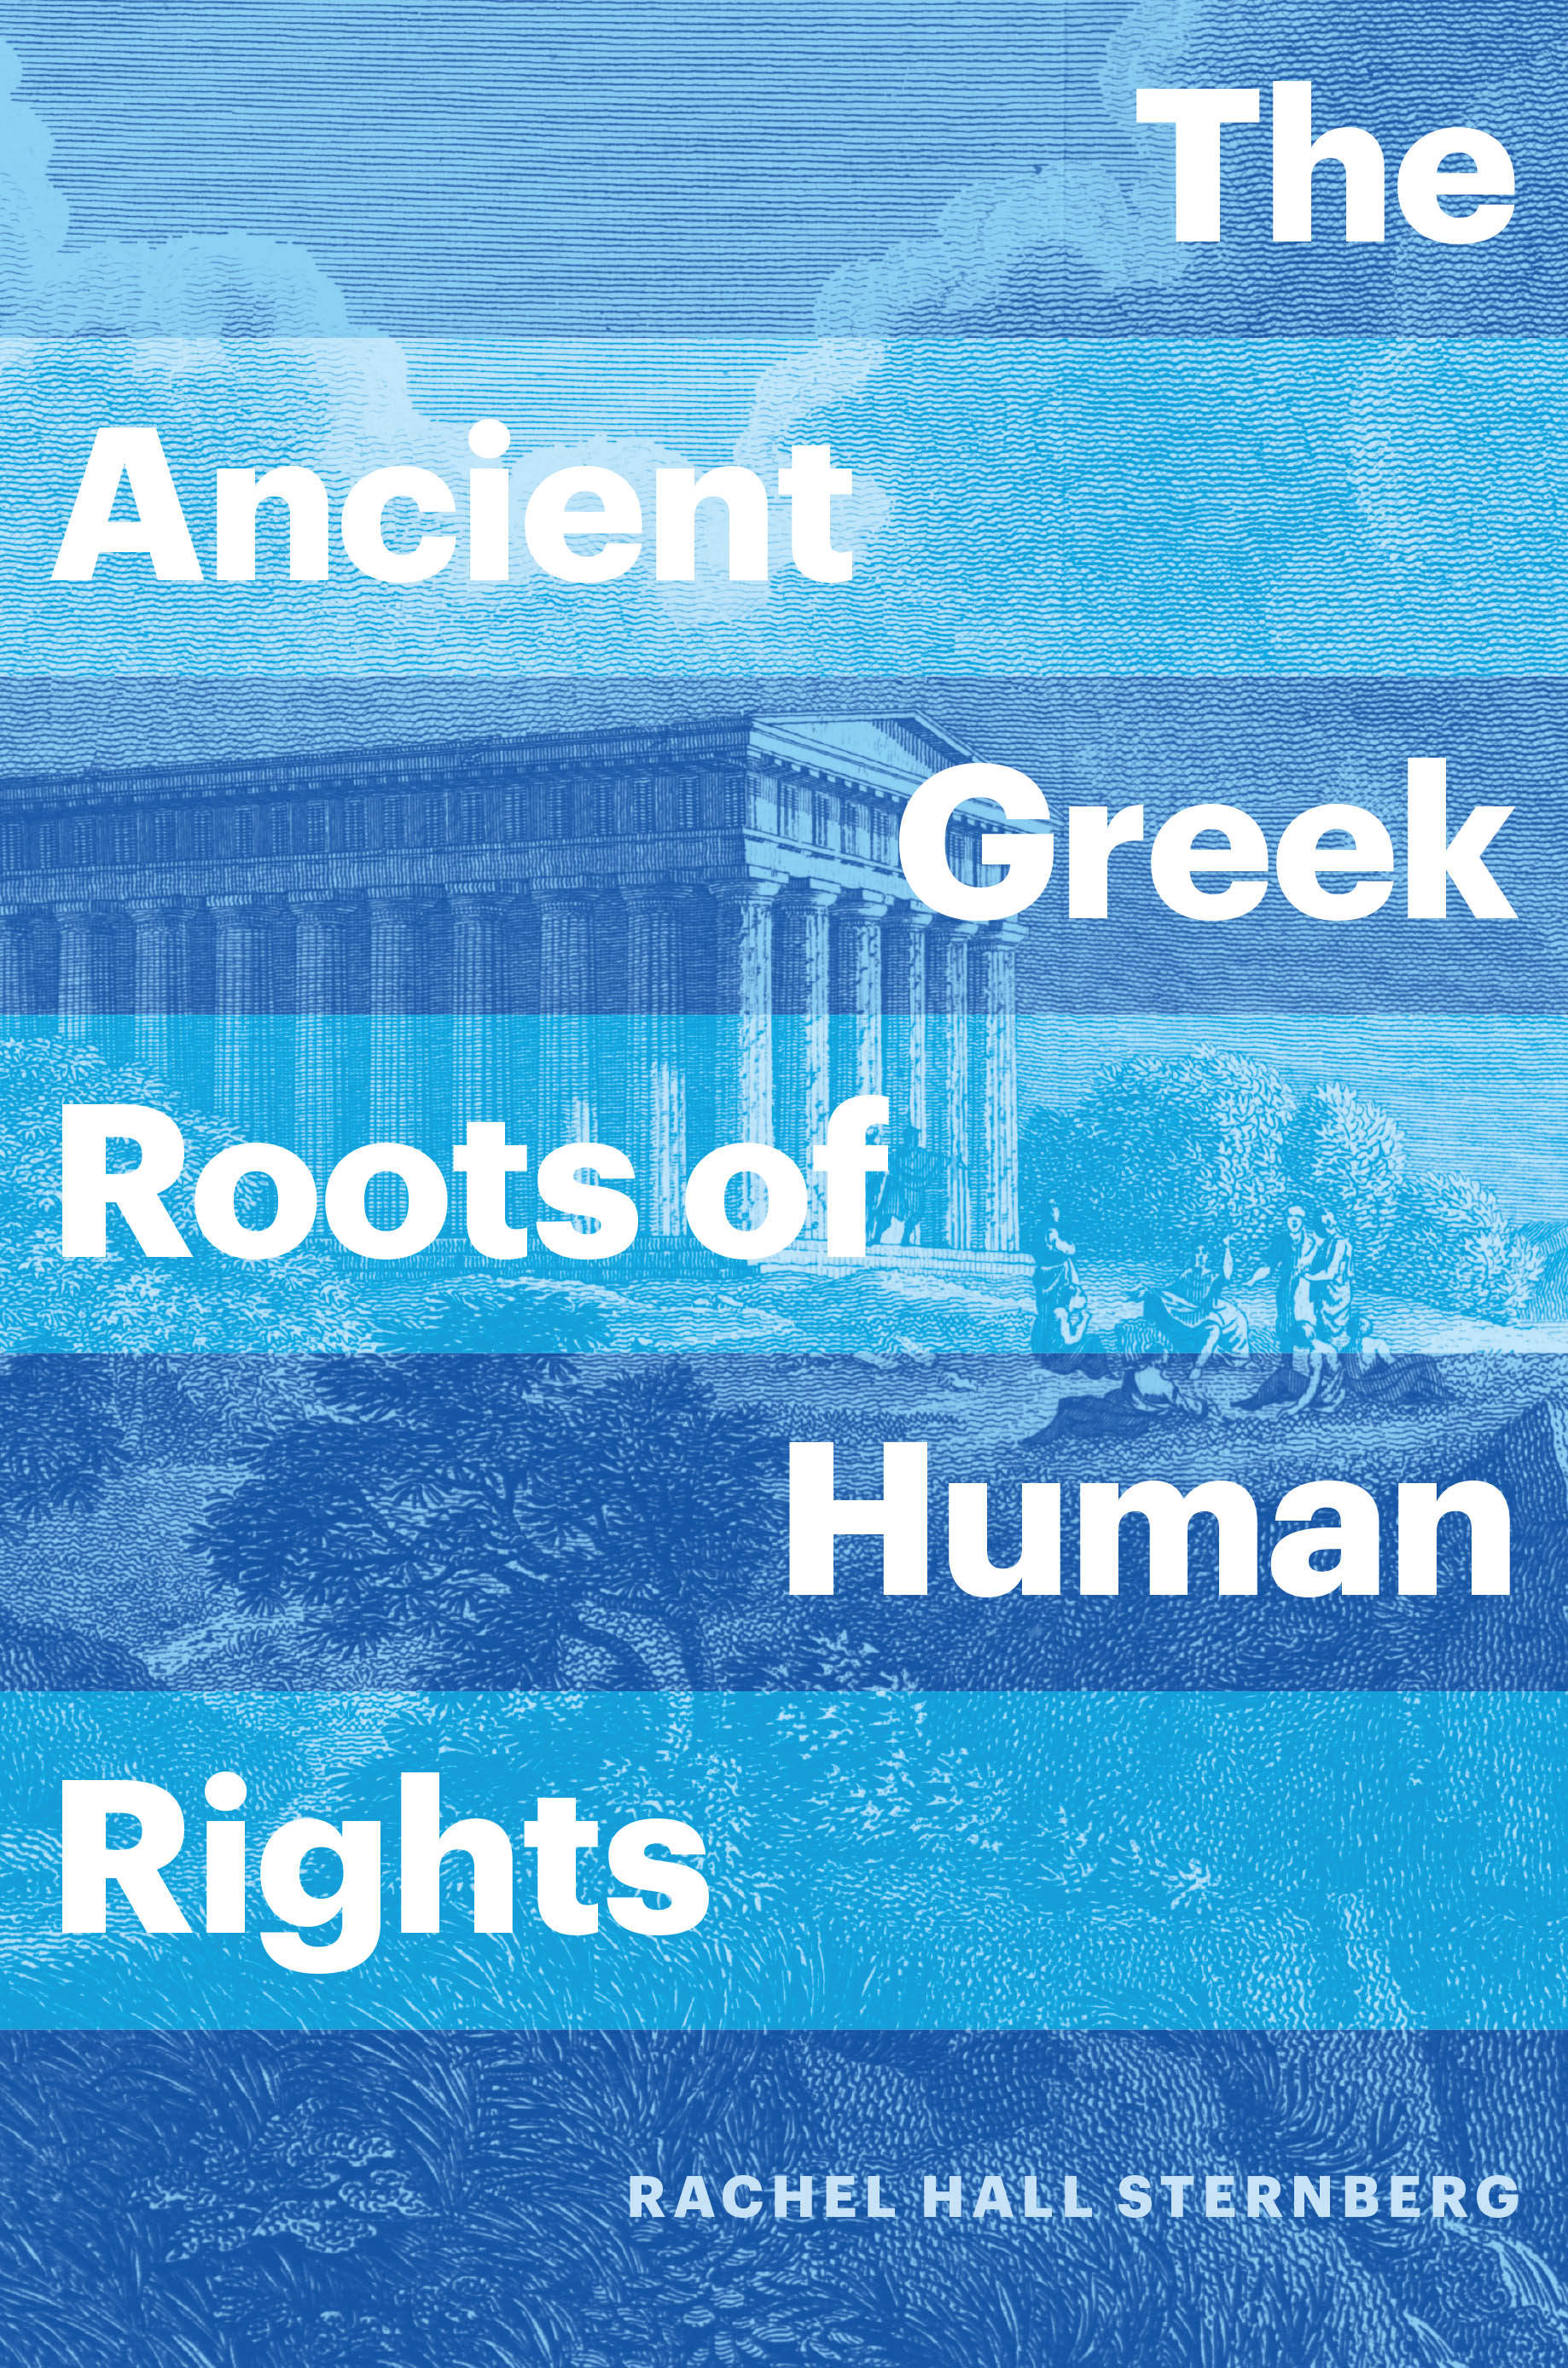 Front cover of the book "The Ancient Greek Roots of Human Rights"